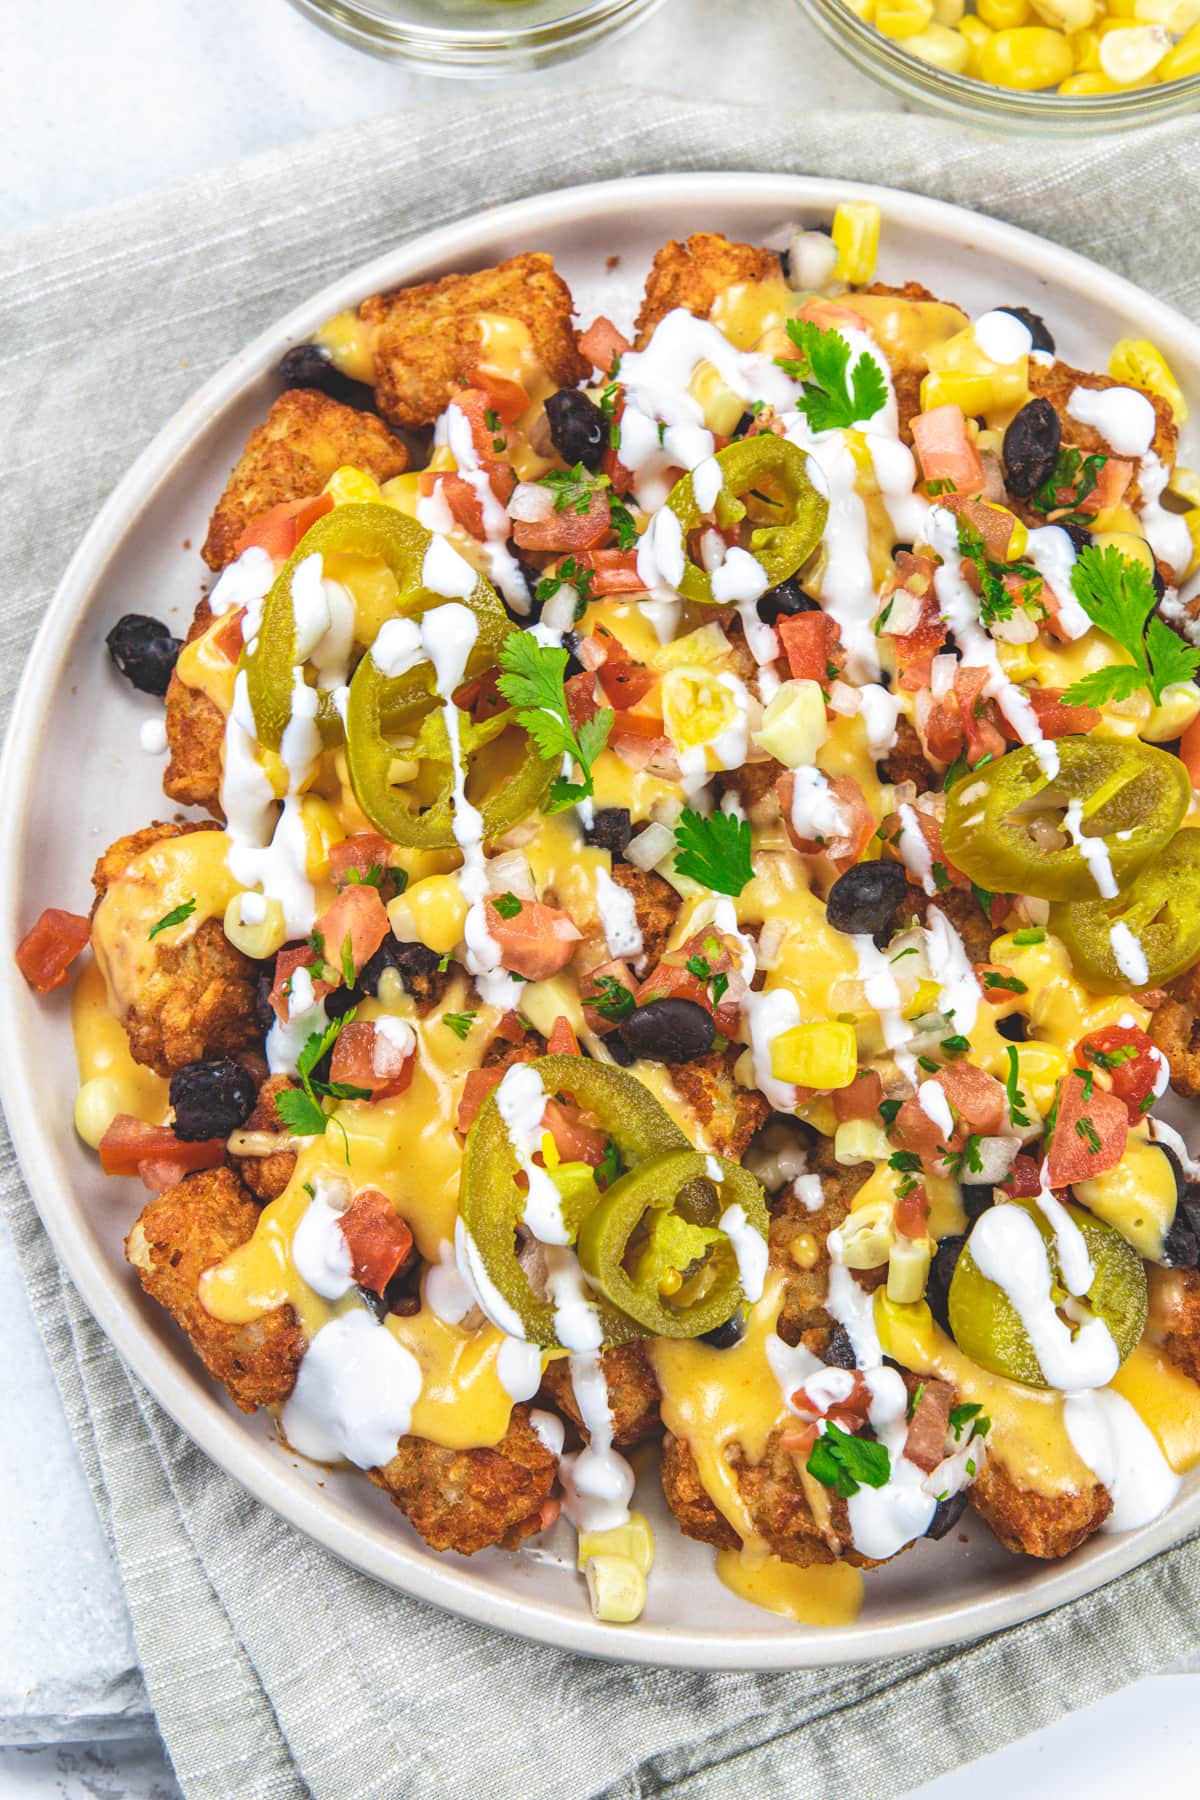 Tater tot nachos in a plate with a napkin under the plate.